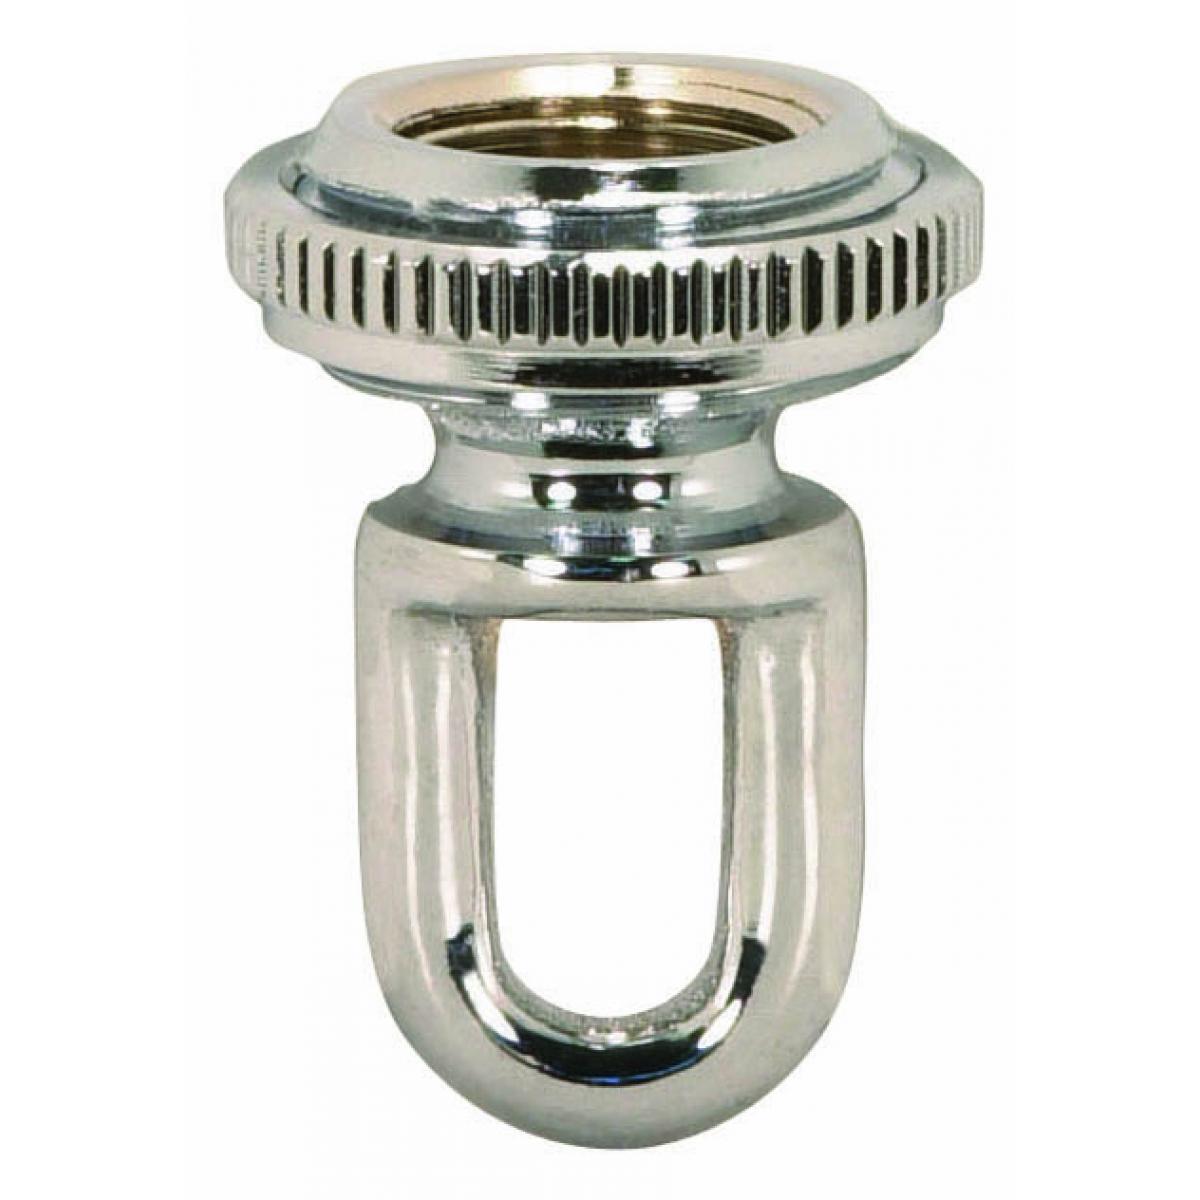 Satco 90-2302 3/8 IP Cast Brass Screw Collar Loop With Ring Fits 1" Canopy Hole 1-1/8" Ring Diameter 1-3/4" Height Polished Chrome Finish